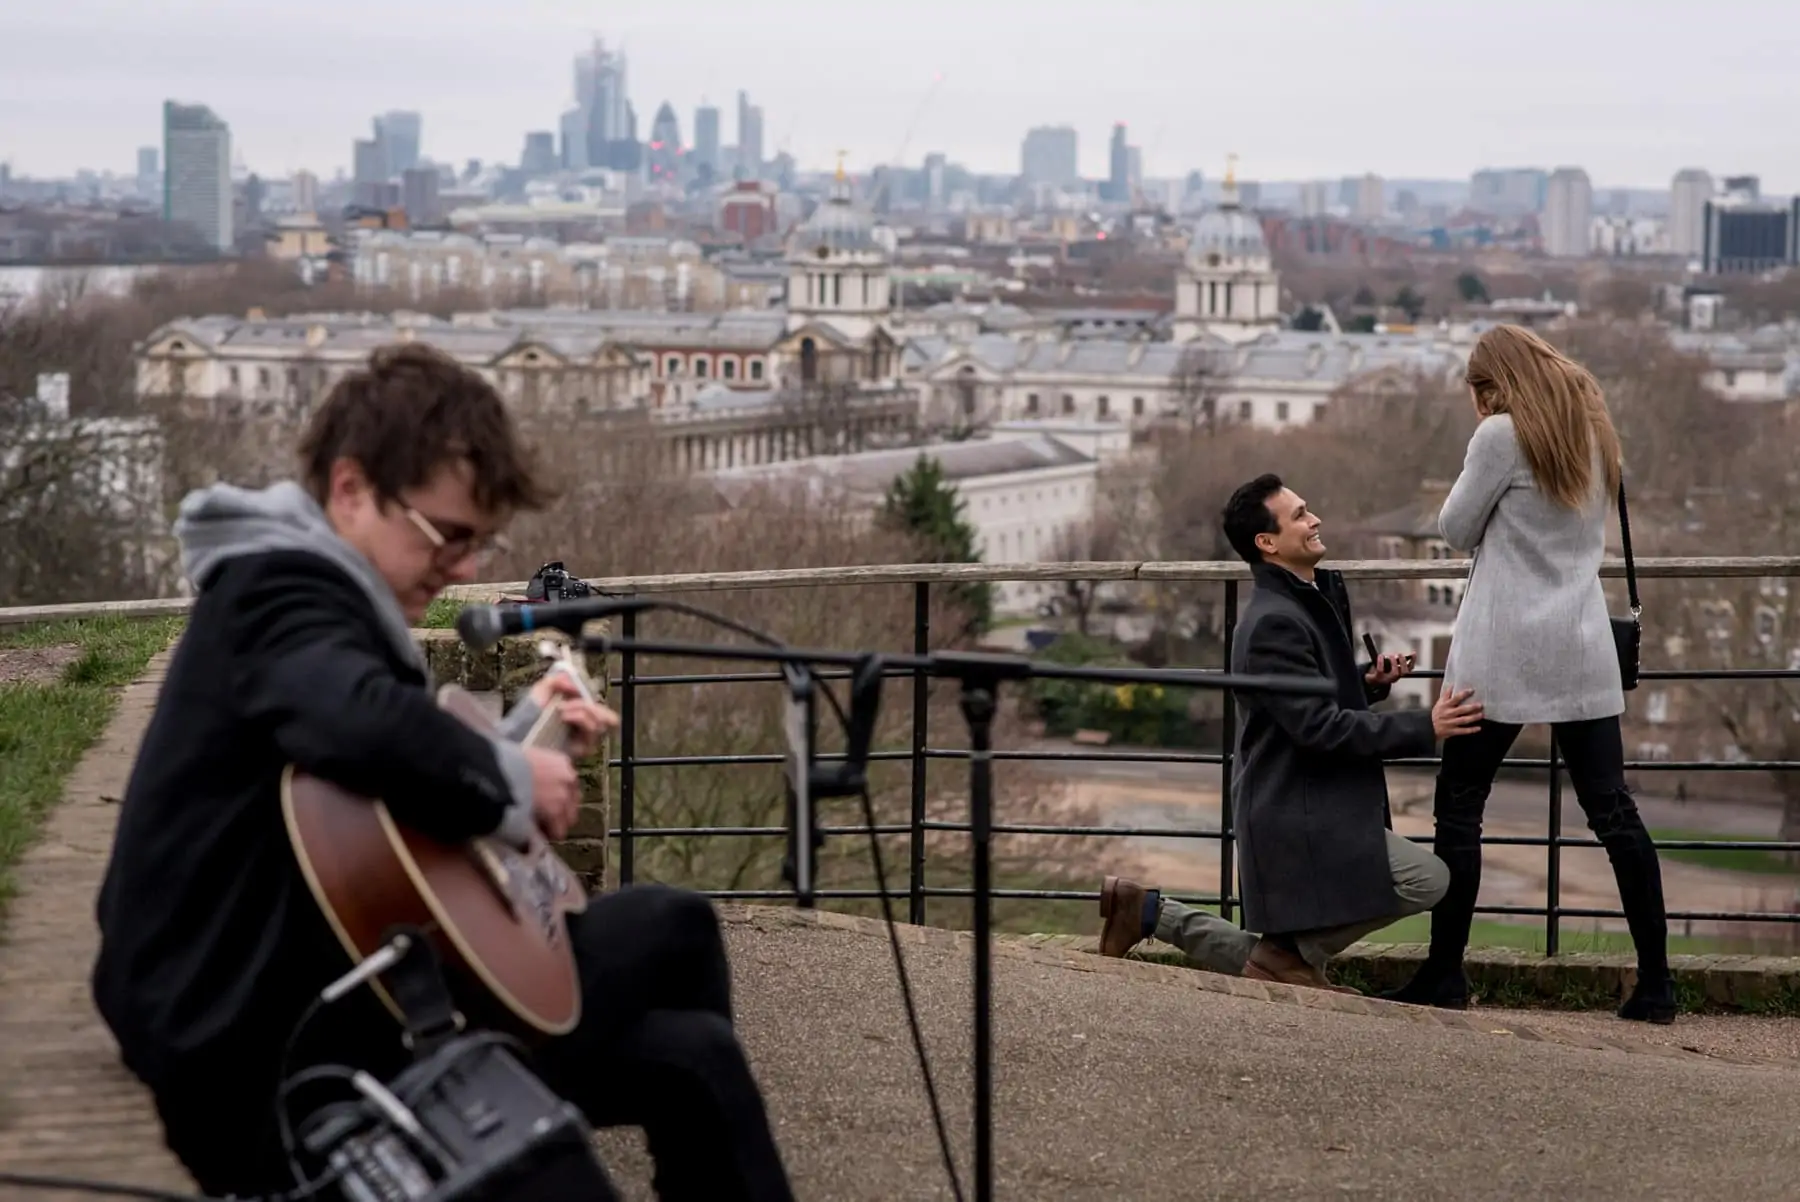 A man on his knees proposing to his girlfriend with views over London and a guitar player. Photo taken in Greenwich park.